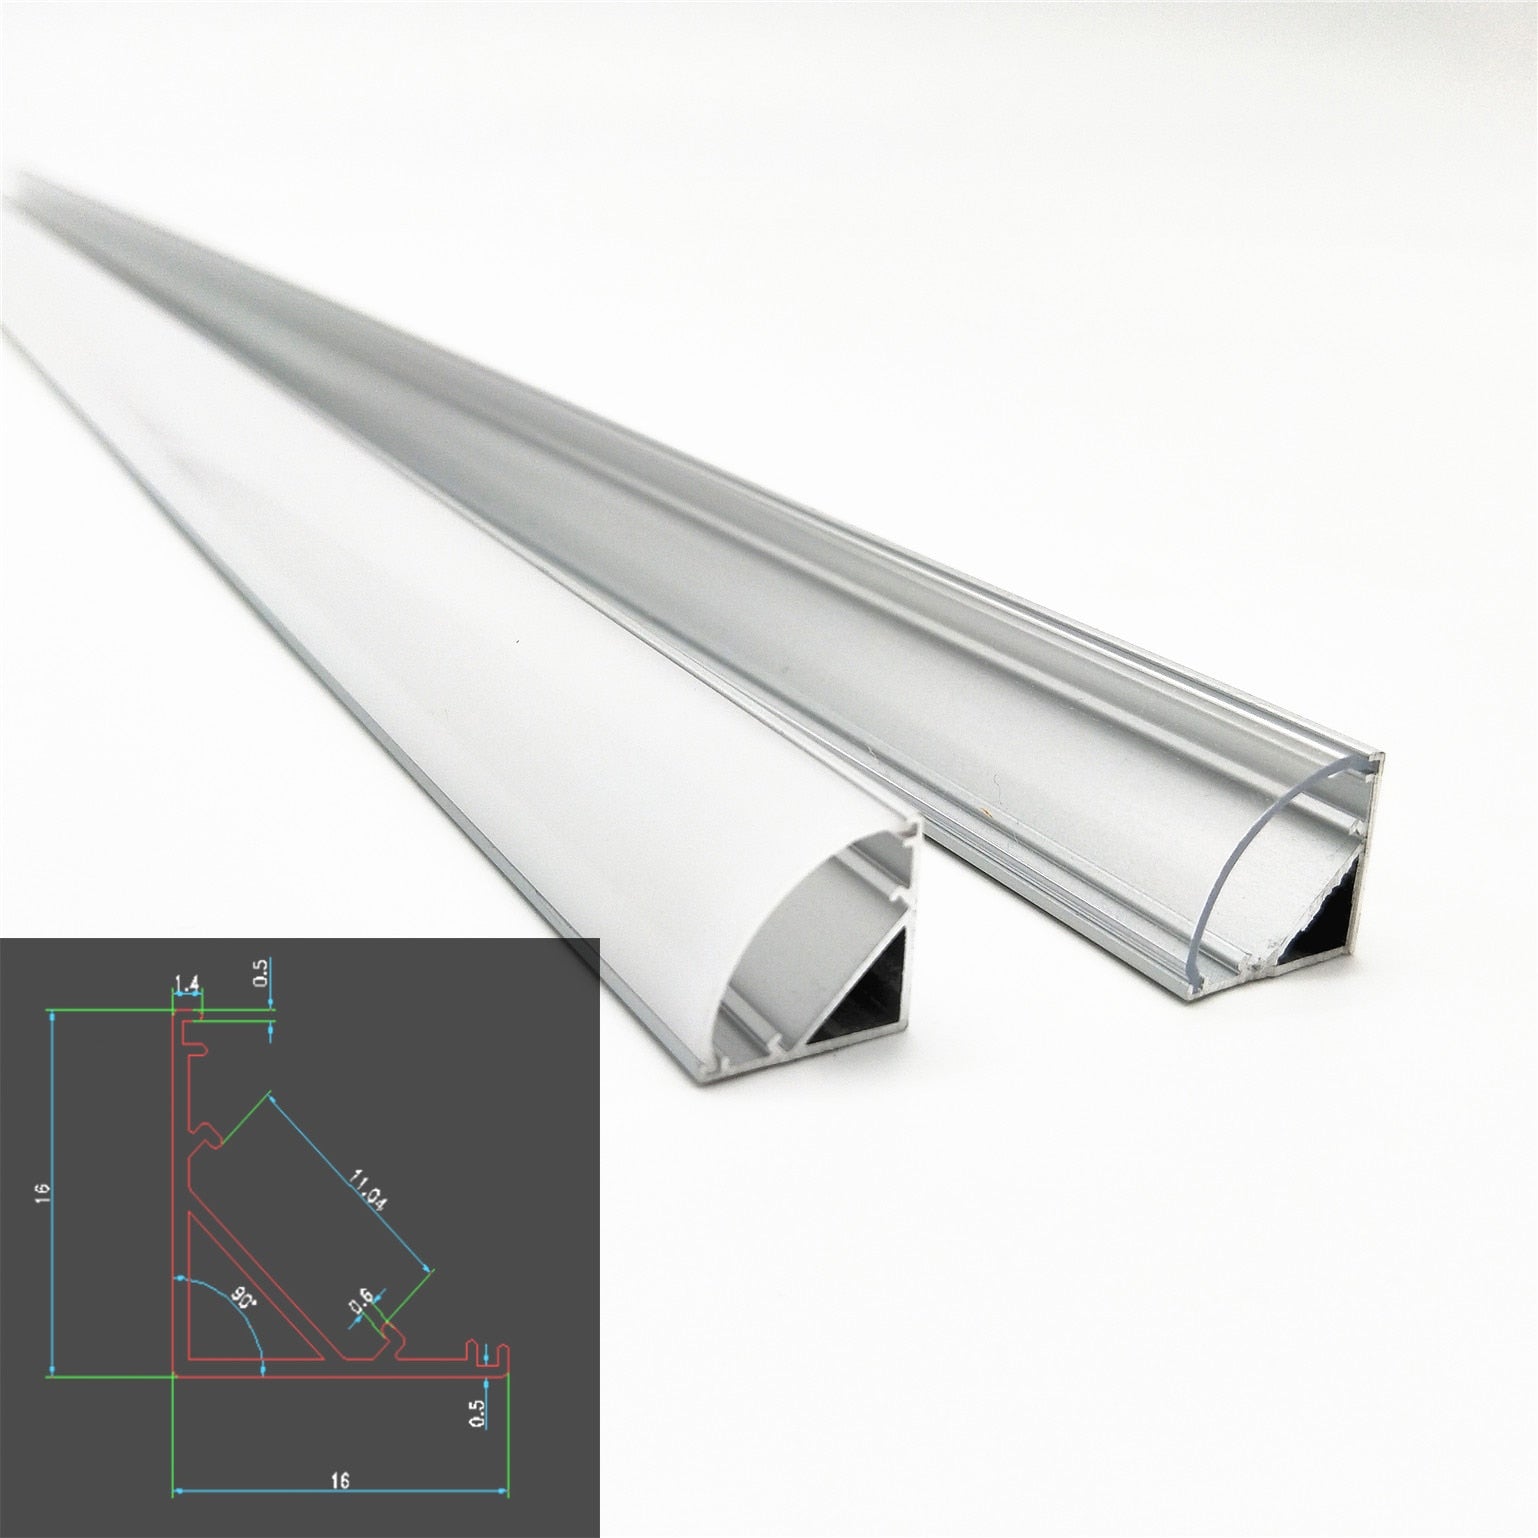 50cm led bar light housing V shape Triangle aluminum profile mikly/clear cover connector Clip channel for 10mm PCB strip